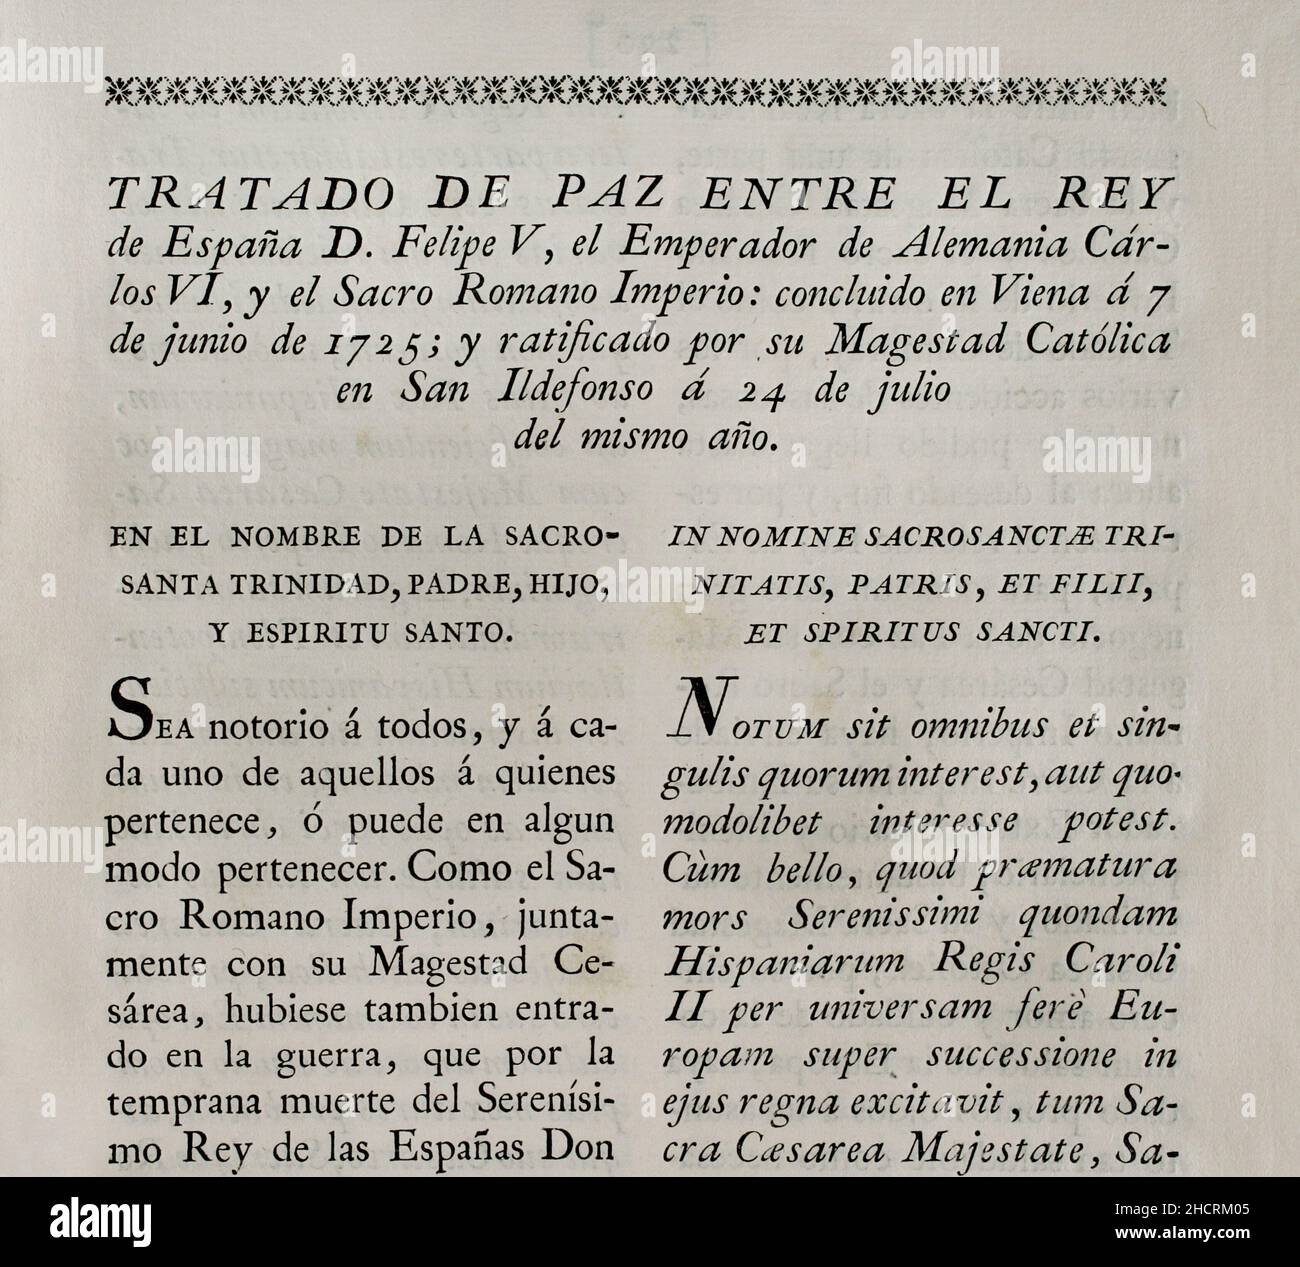 Peace treaty between the King of Spain Philip V and the Holy Roman Emperor Charles VI. Concluded in Vienna on 7 June 1725; ratified by Philip V in San Ildefonso on 24 July of that year. Collection of the Treaties of Peace, Alliance, Commerce adjusted by the Crown of Spain with the Foreign Powers (Colección de los Tratados de Paz, Alianza, Comercio ajustados por la Corona de España con las Potencias Extranjeras). Volume II. Madrid, 1800. Historical Military Library of Barcelona, Catalonia, Spain. Stock Photo